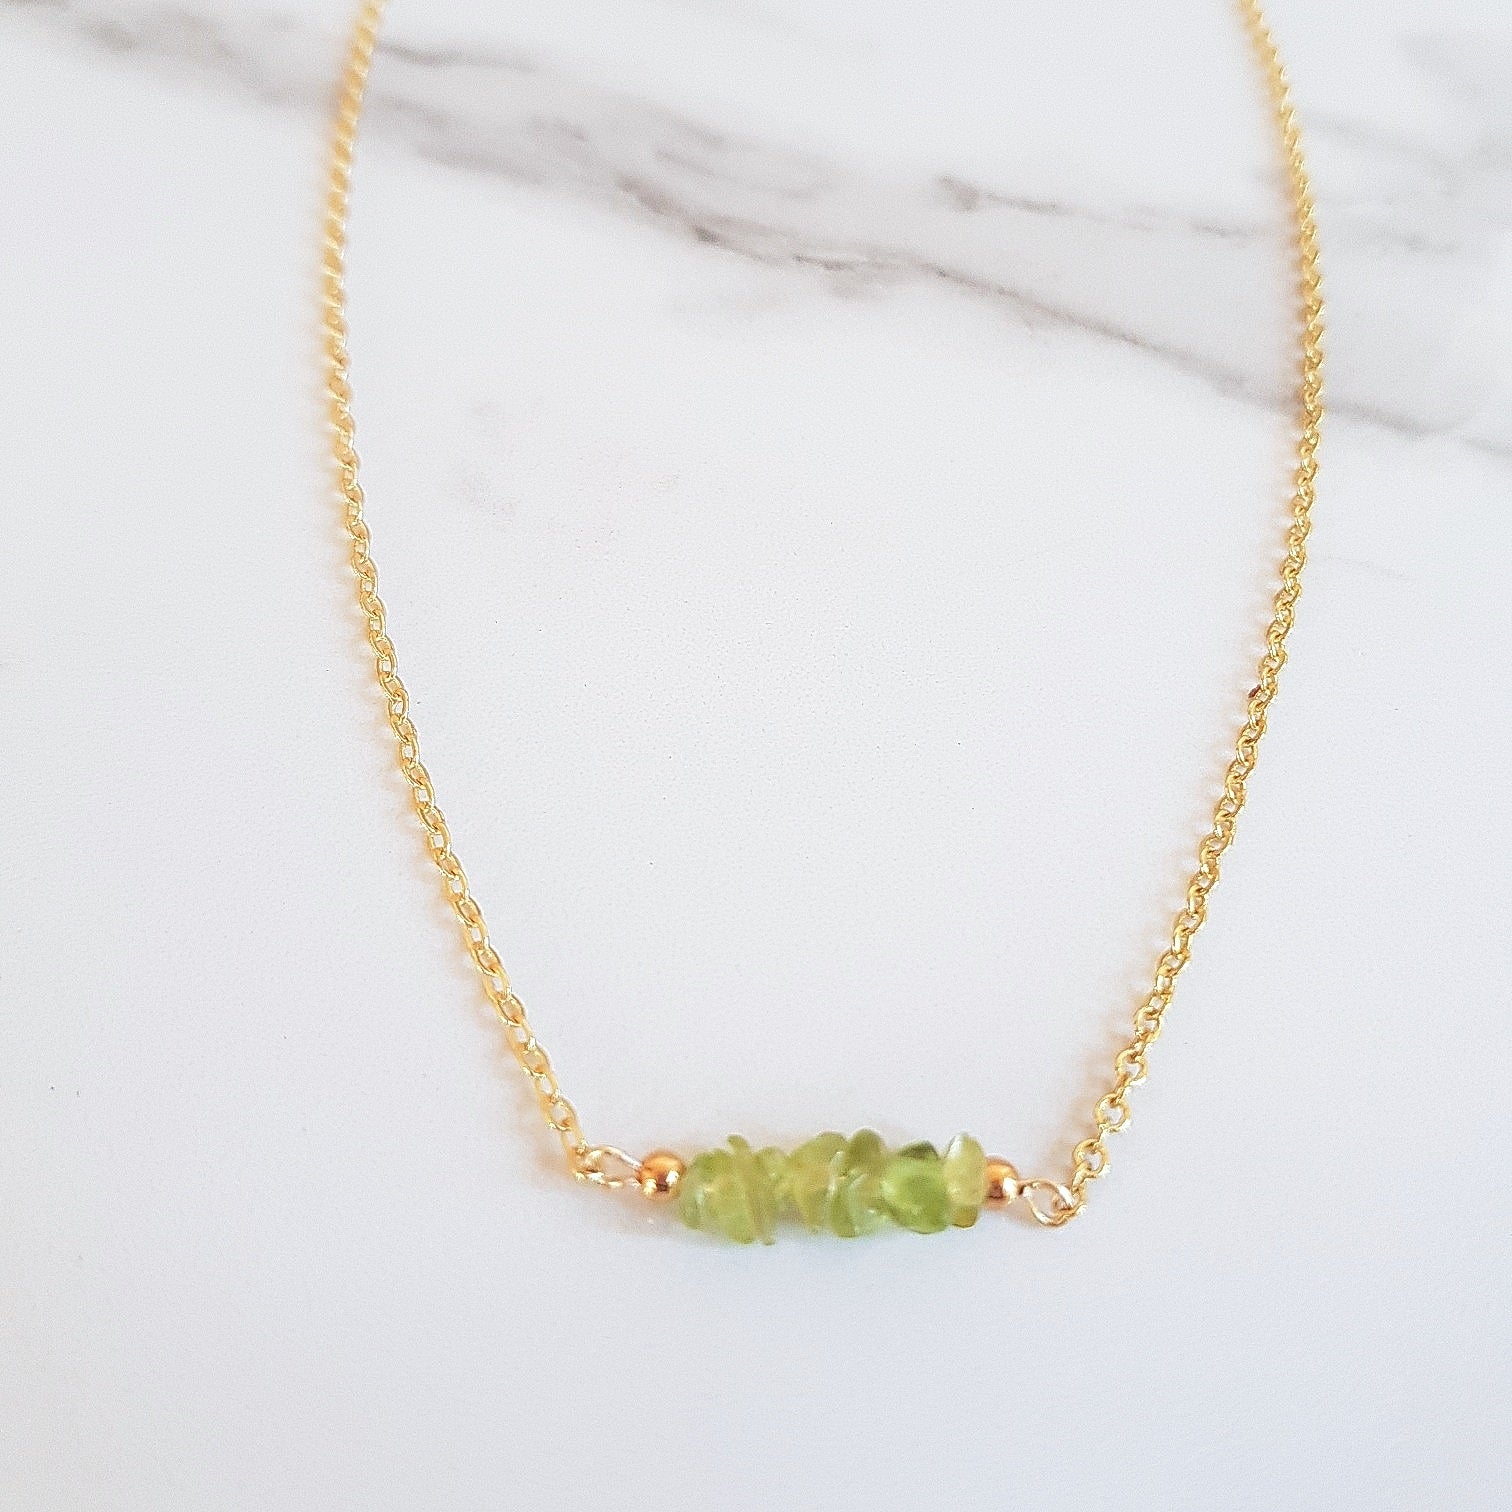 August Dainty Necklace - Peridot